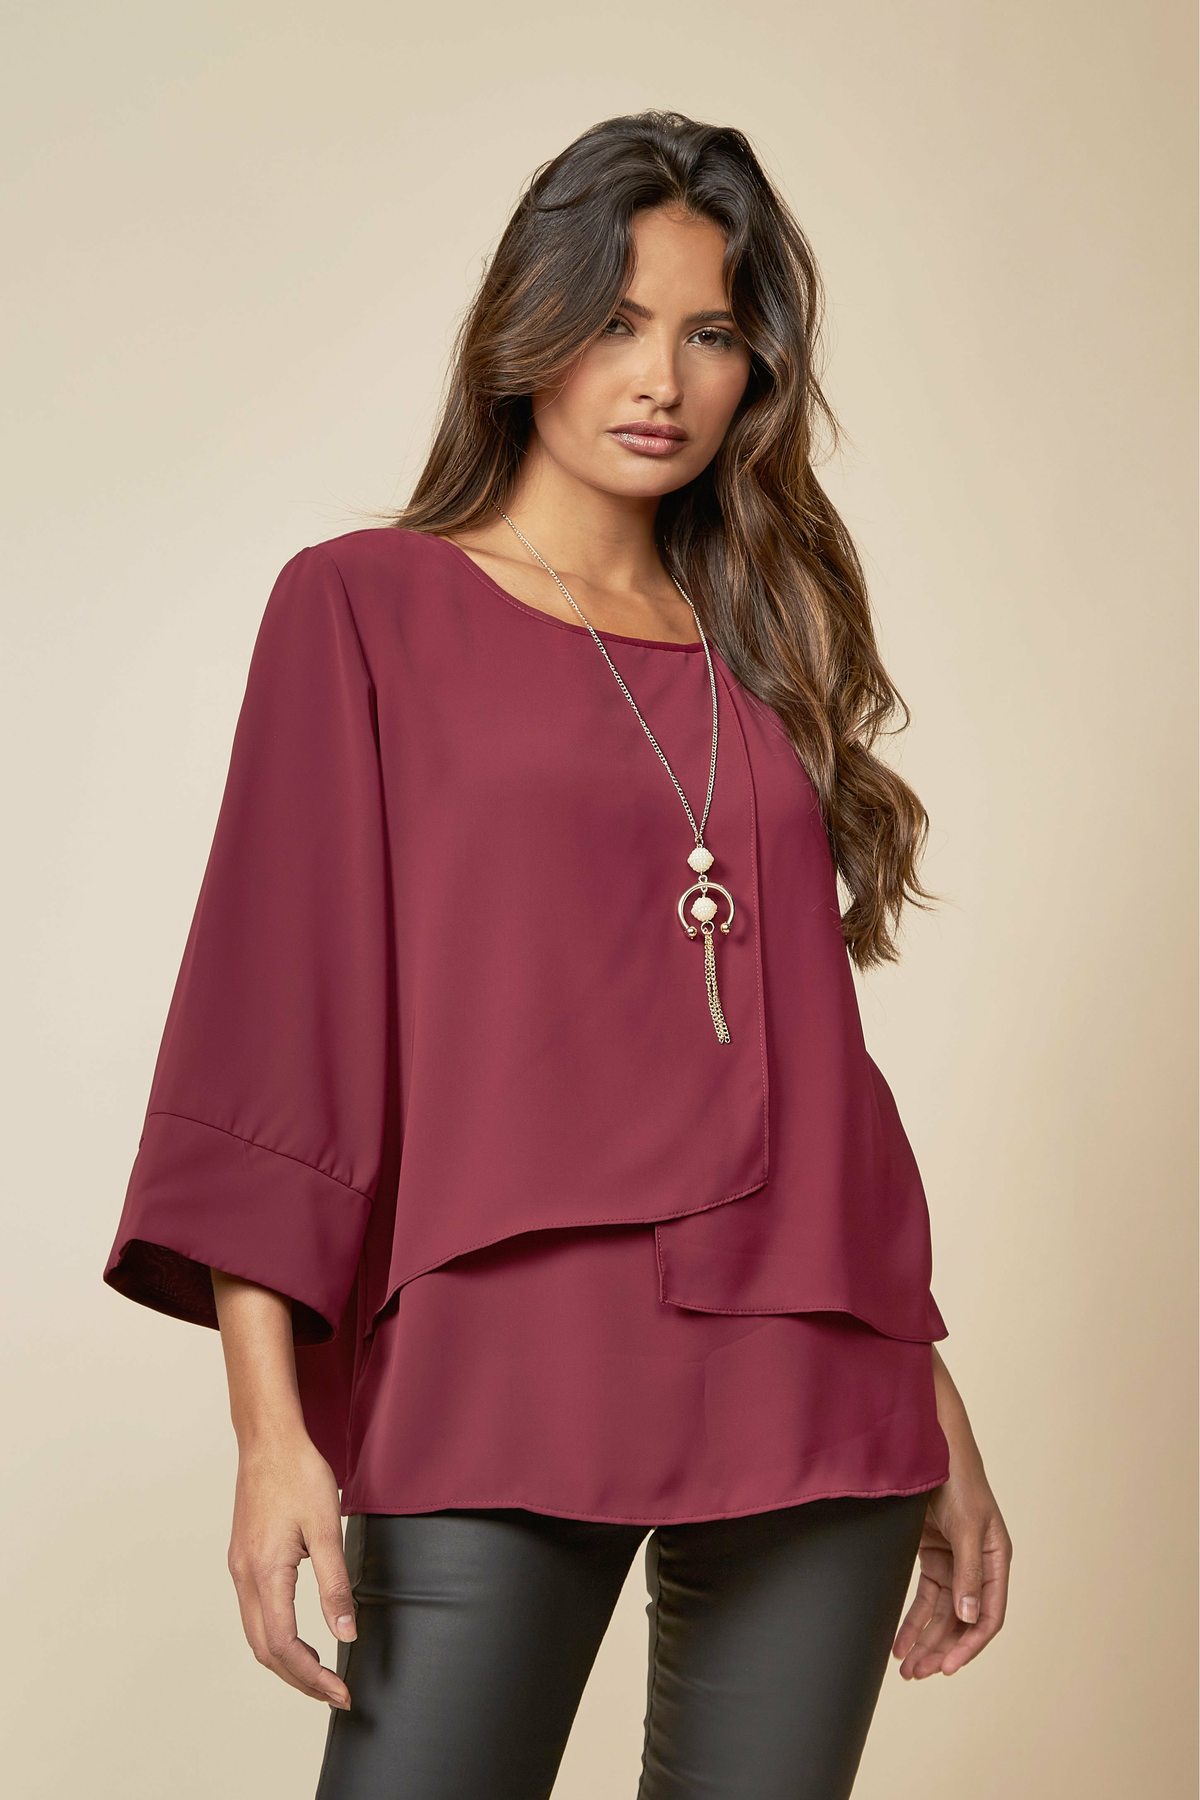 Layered Top With 3/4 Sleeves in Burgundy with Necklace GLR FASHION NETWORKING